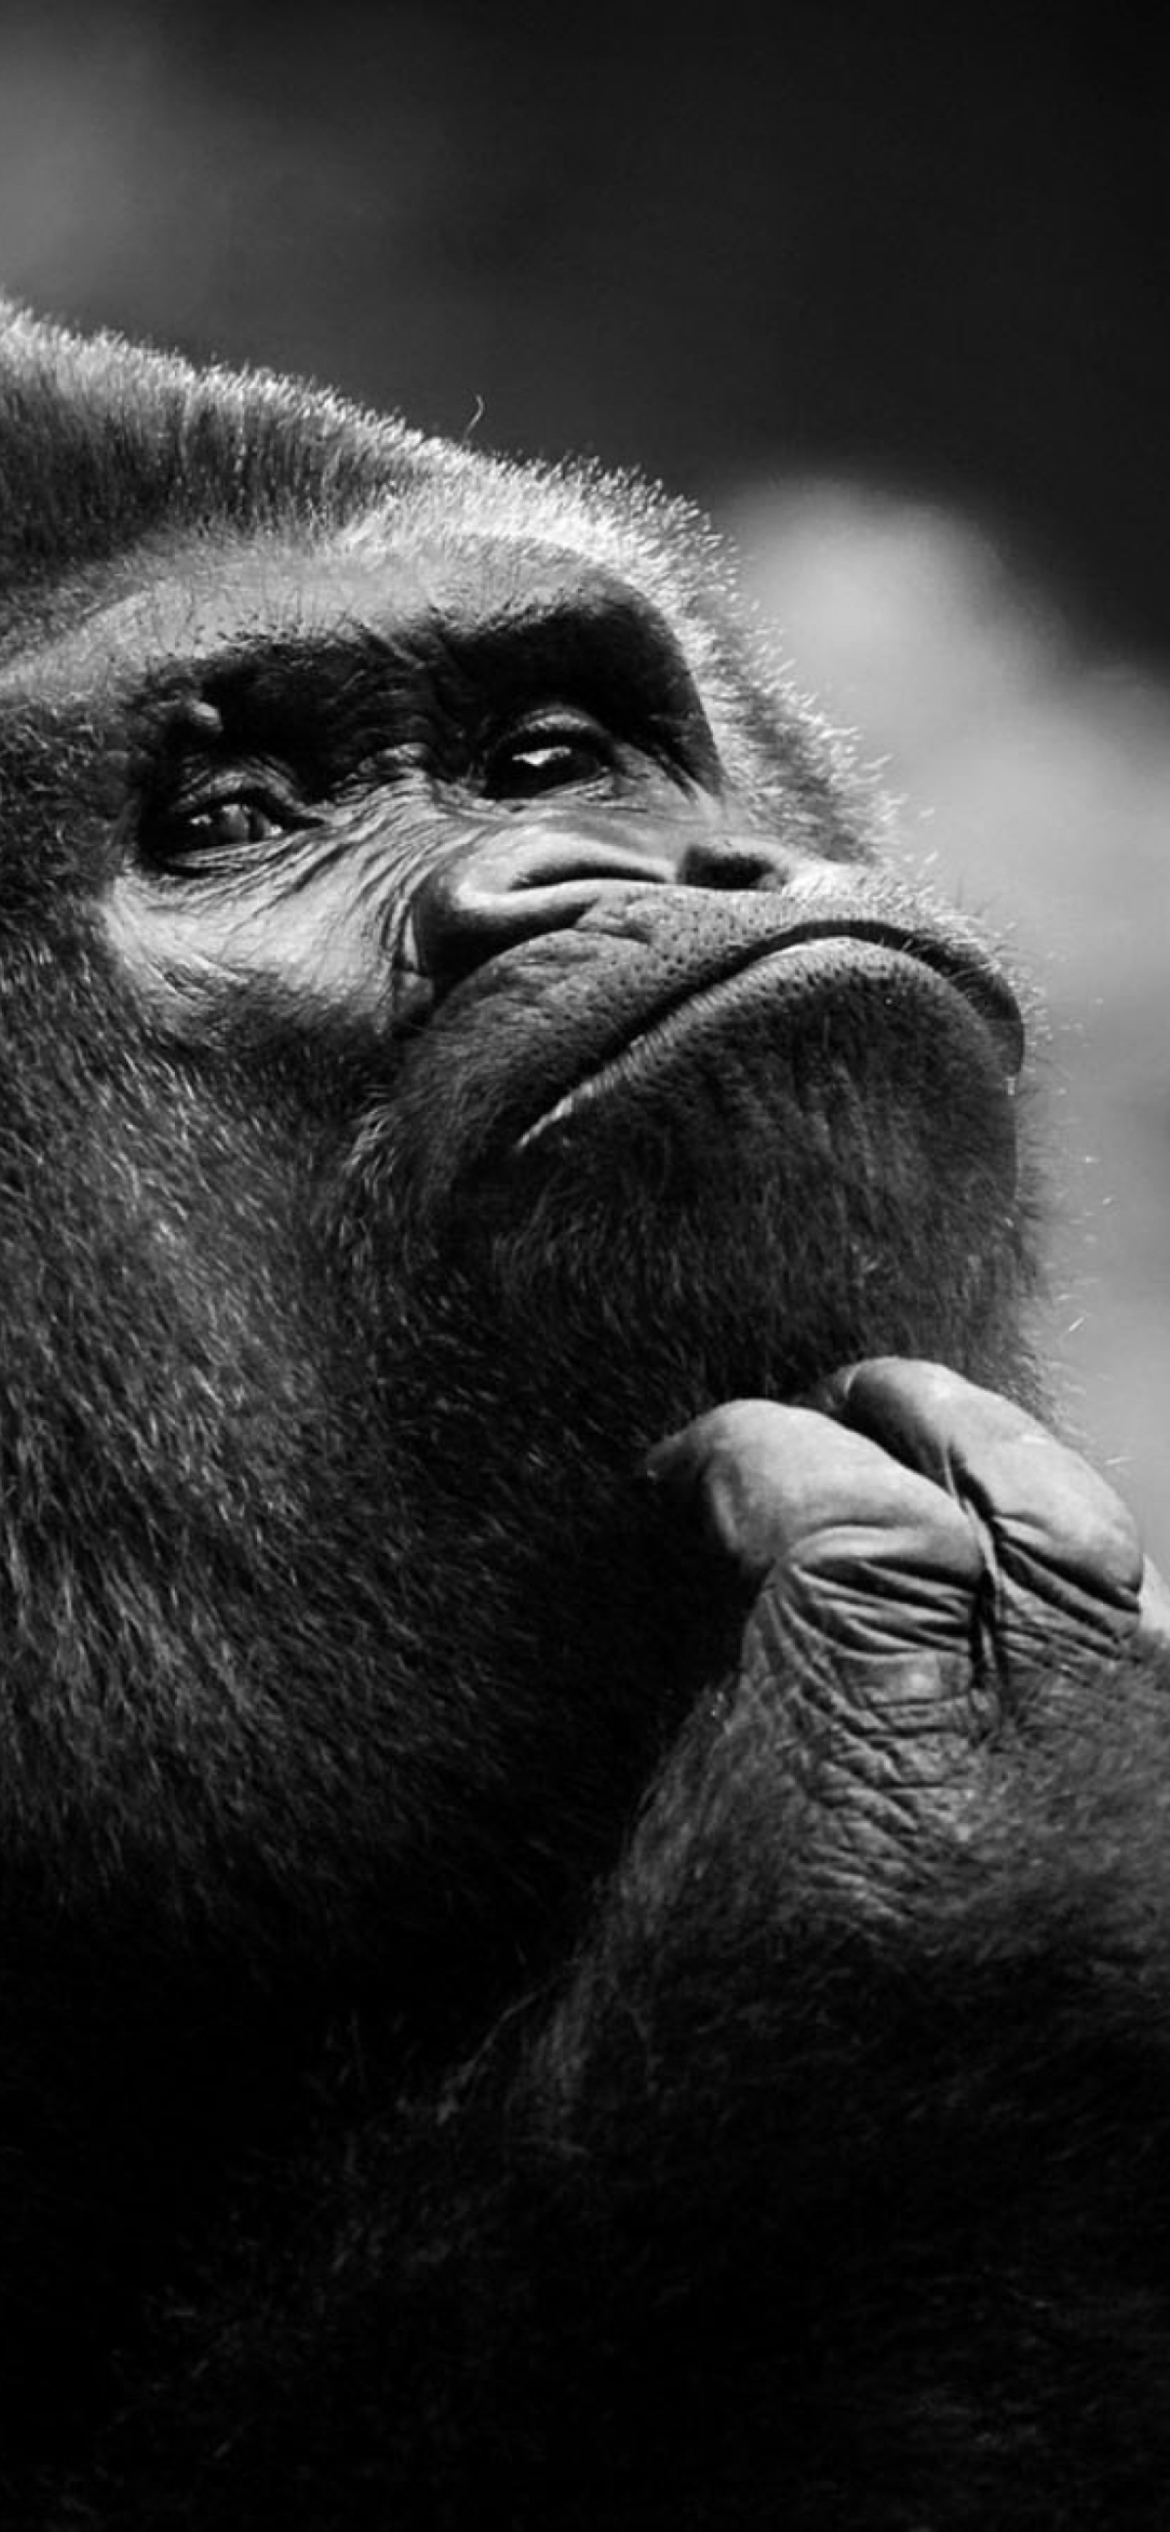 Thoughtful Gorilla Wallpaper For Iphone 11